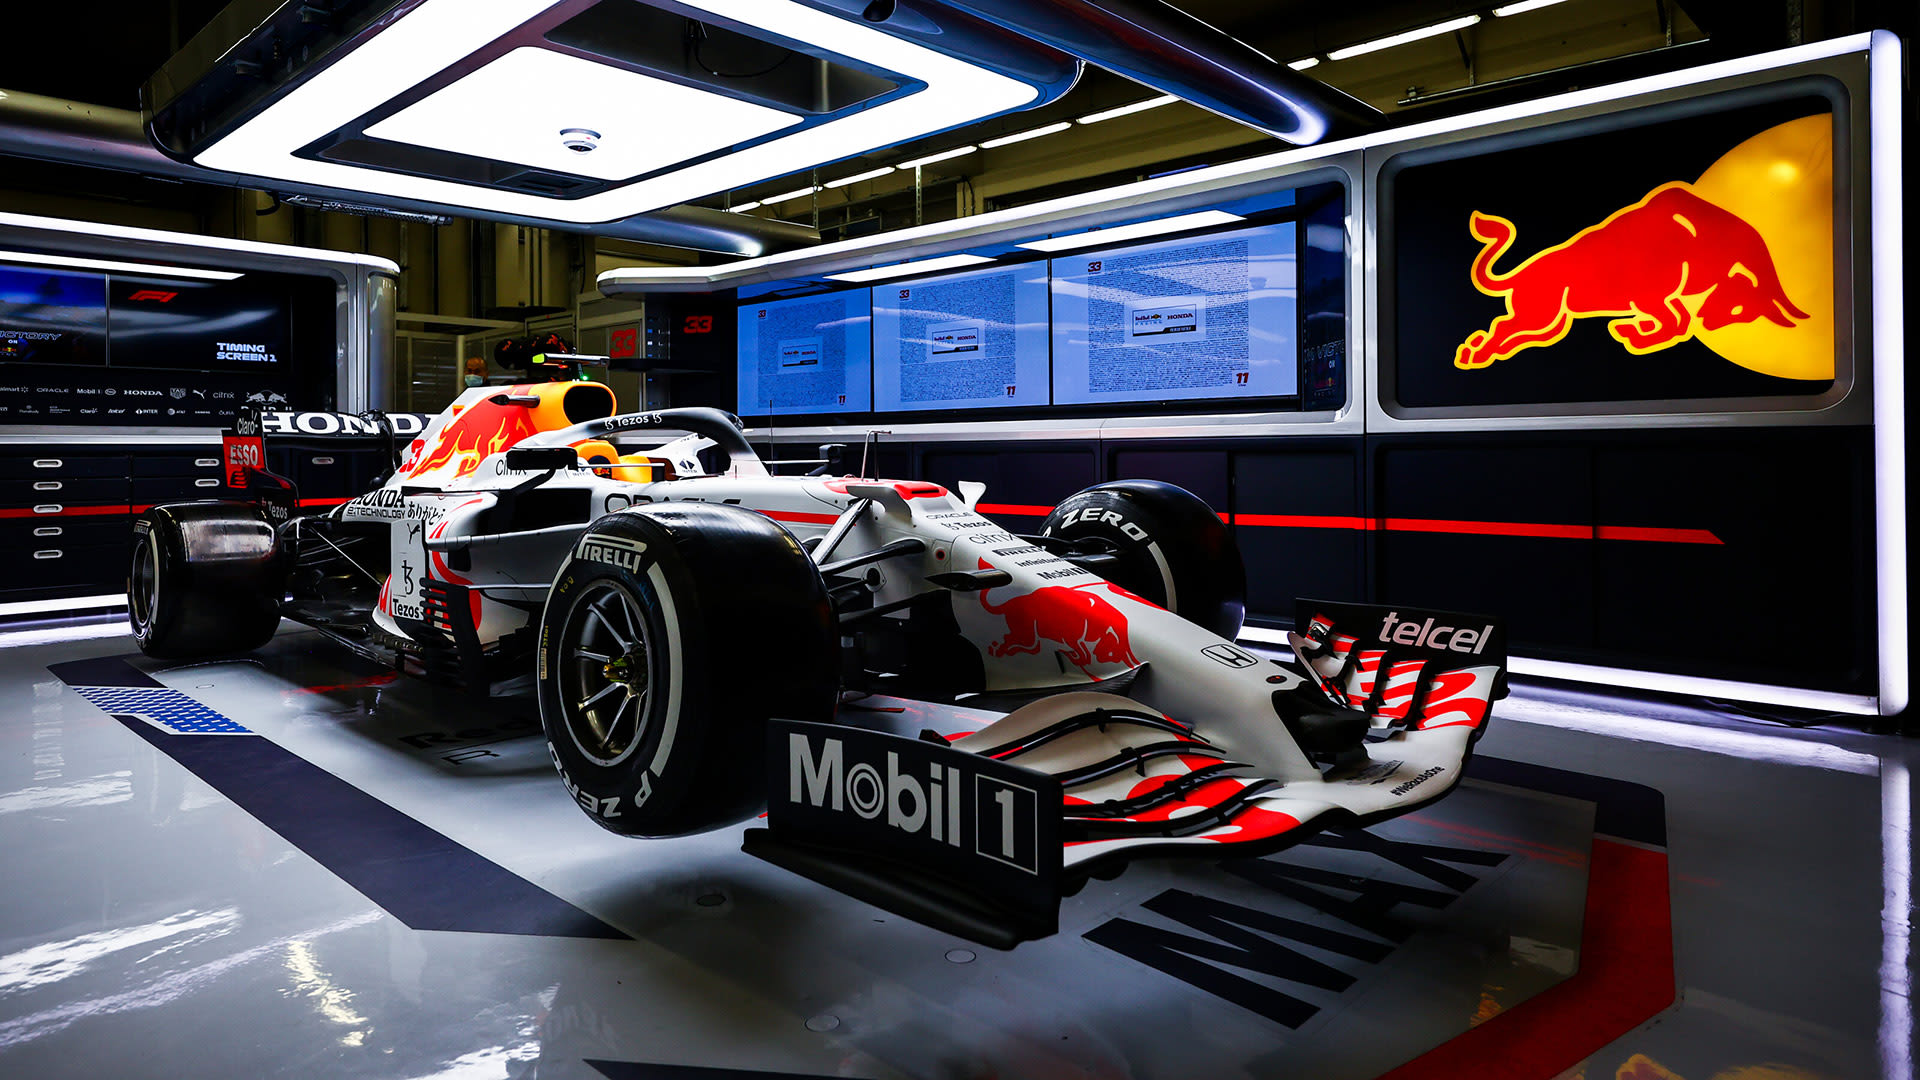 REVEALED: Check out Red Bull's Honda tribute livery the Turkish Grand Prix | 1®